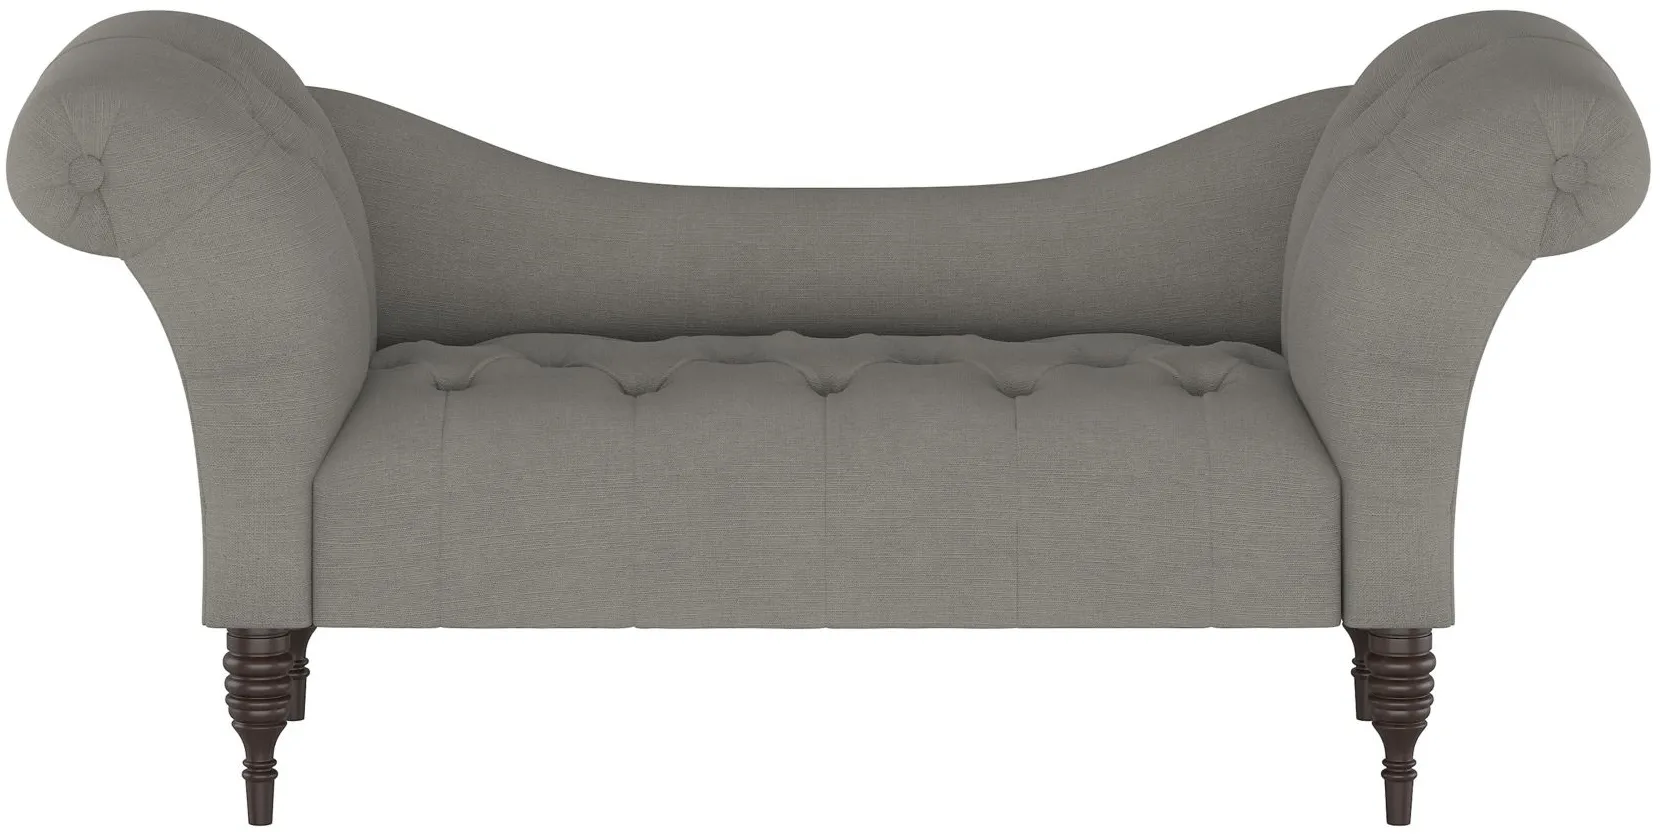 Lansing Chaise Lounge in Linen Grey by Skyline